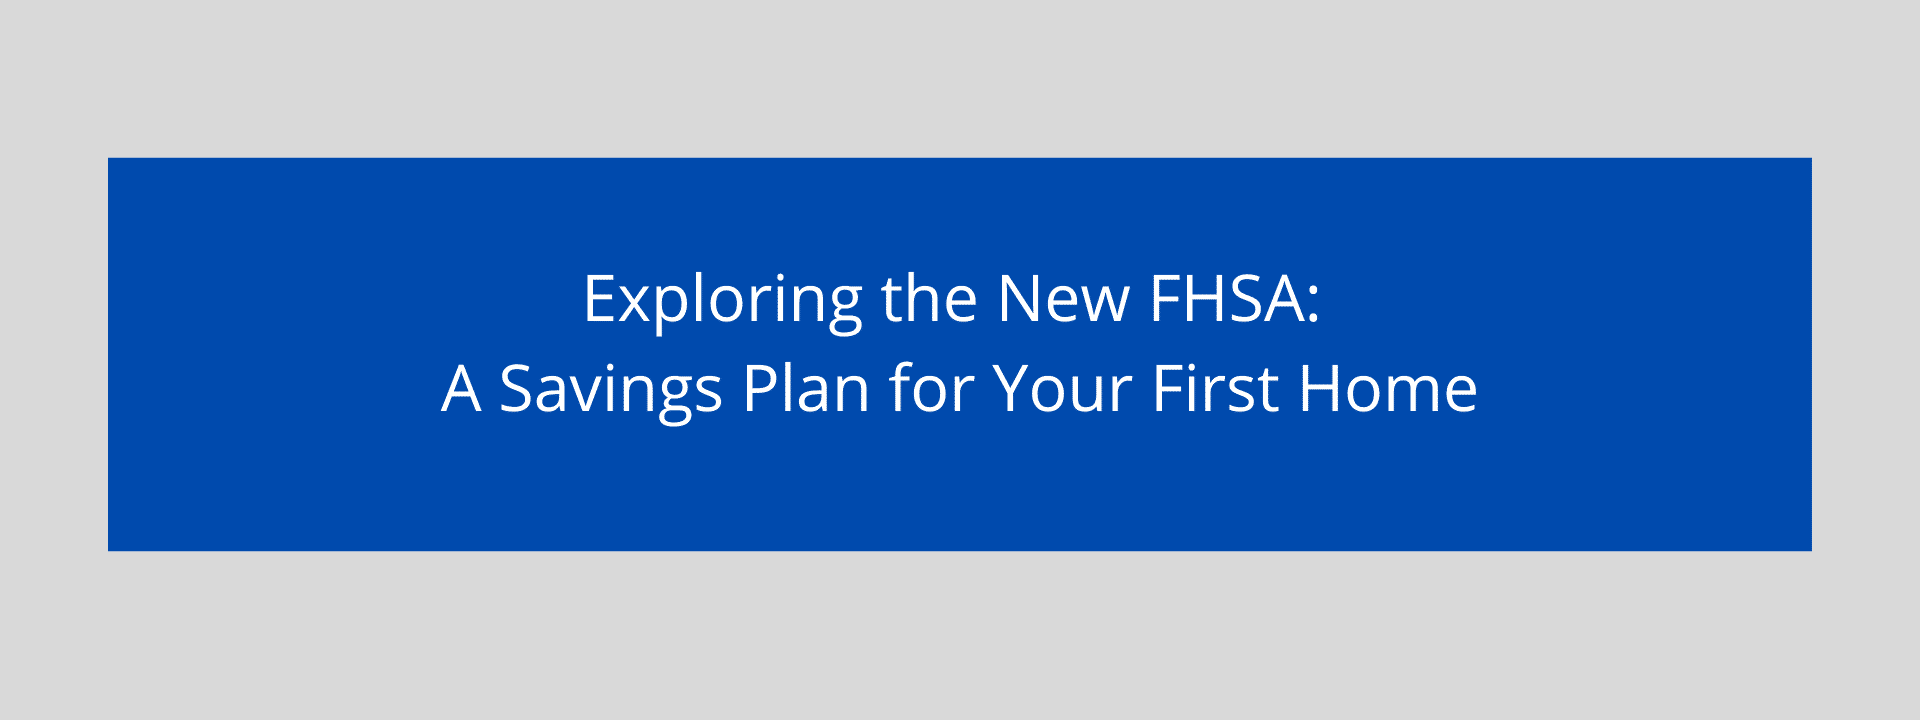 FHSA: A Savings Plan for Your First Home